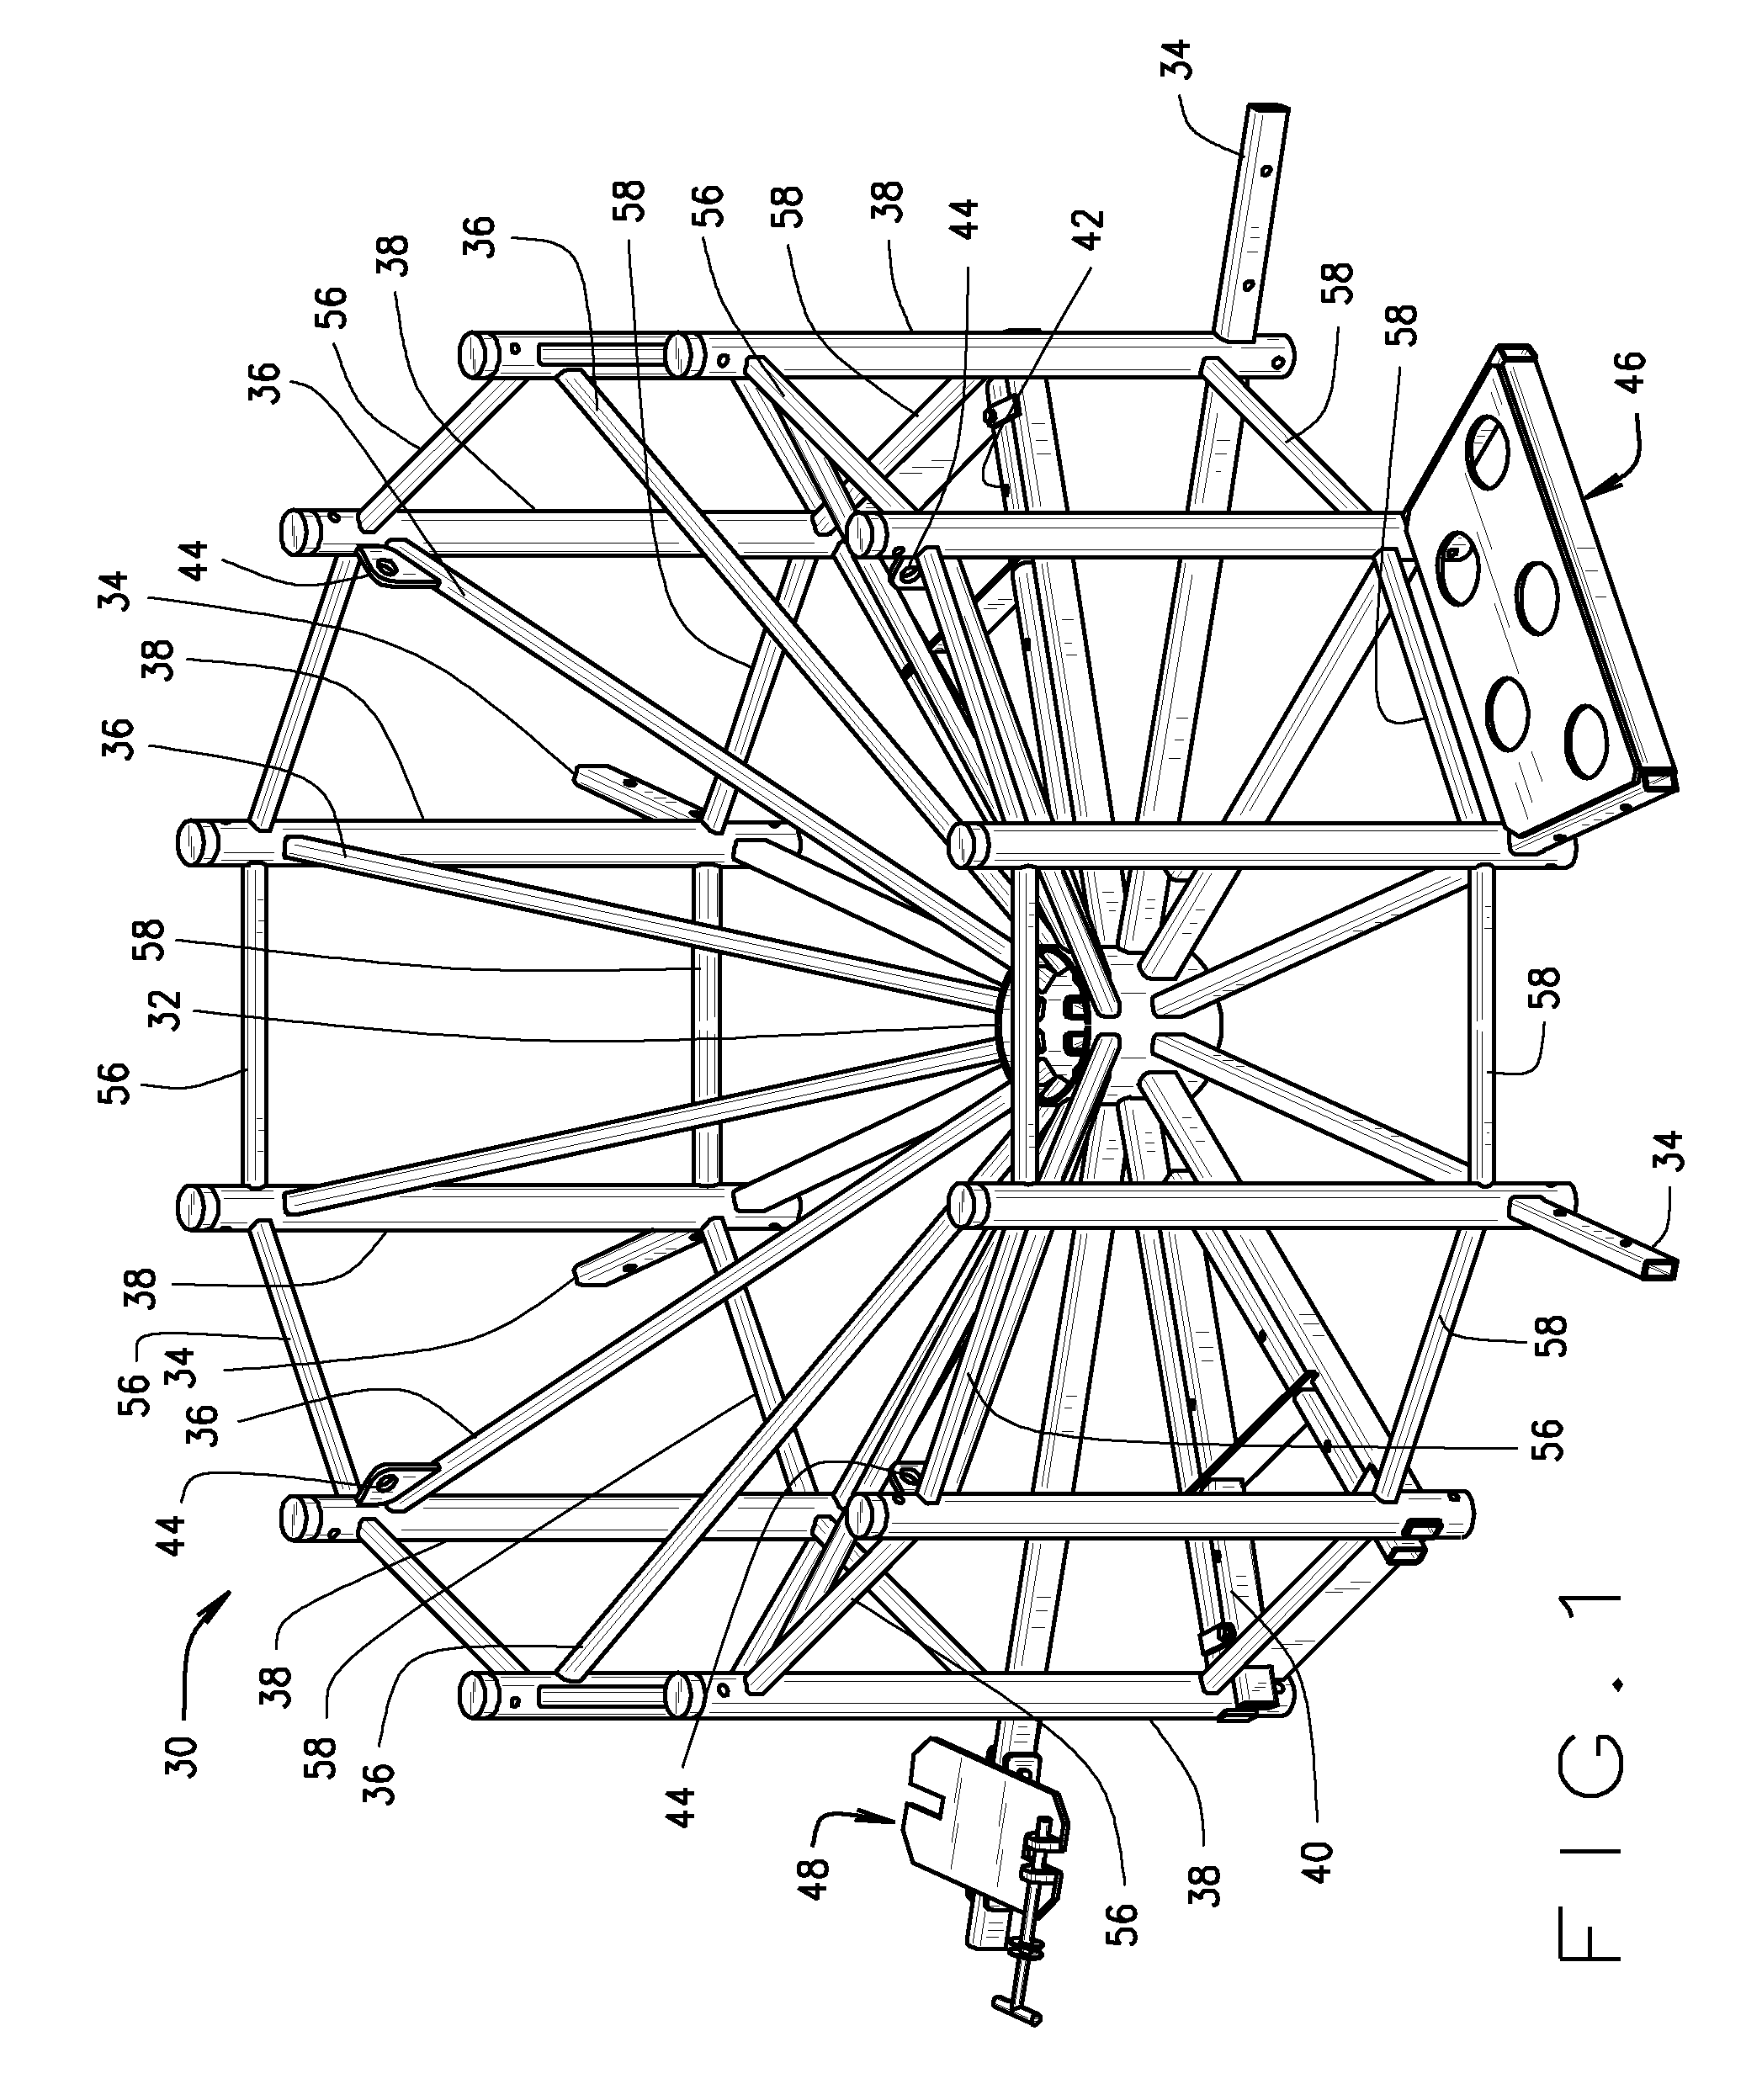 Universal method and apparatus for deploying flying leads